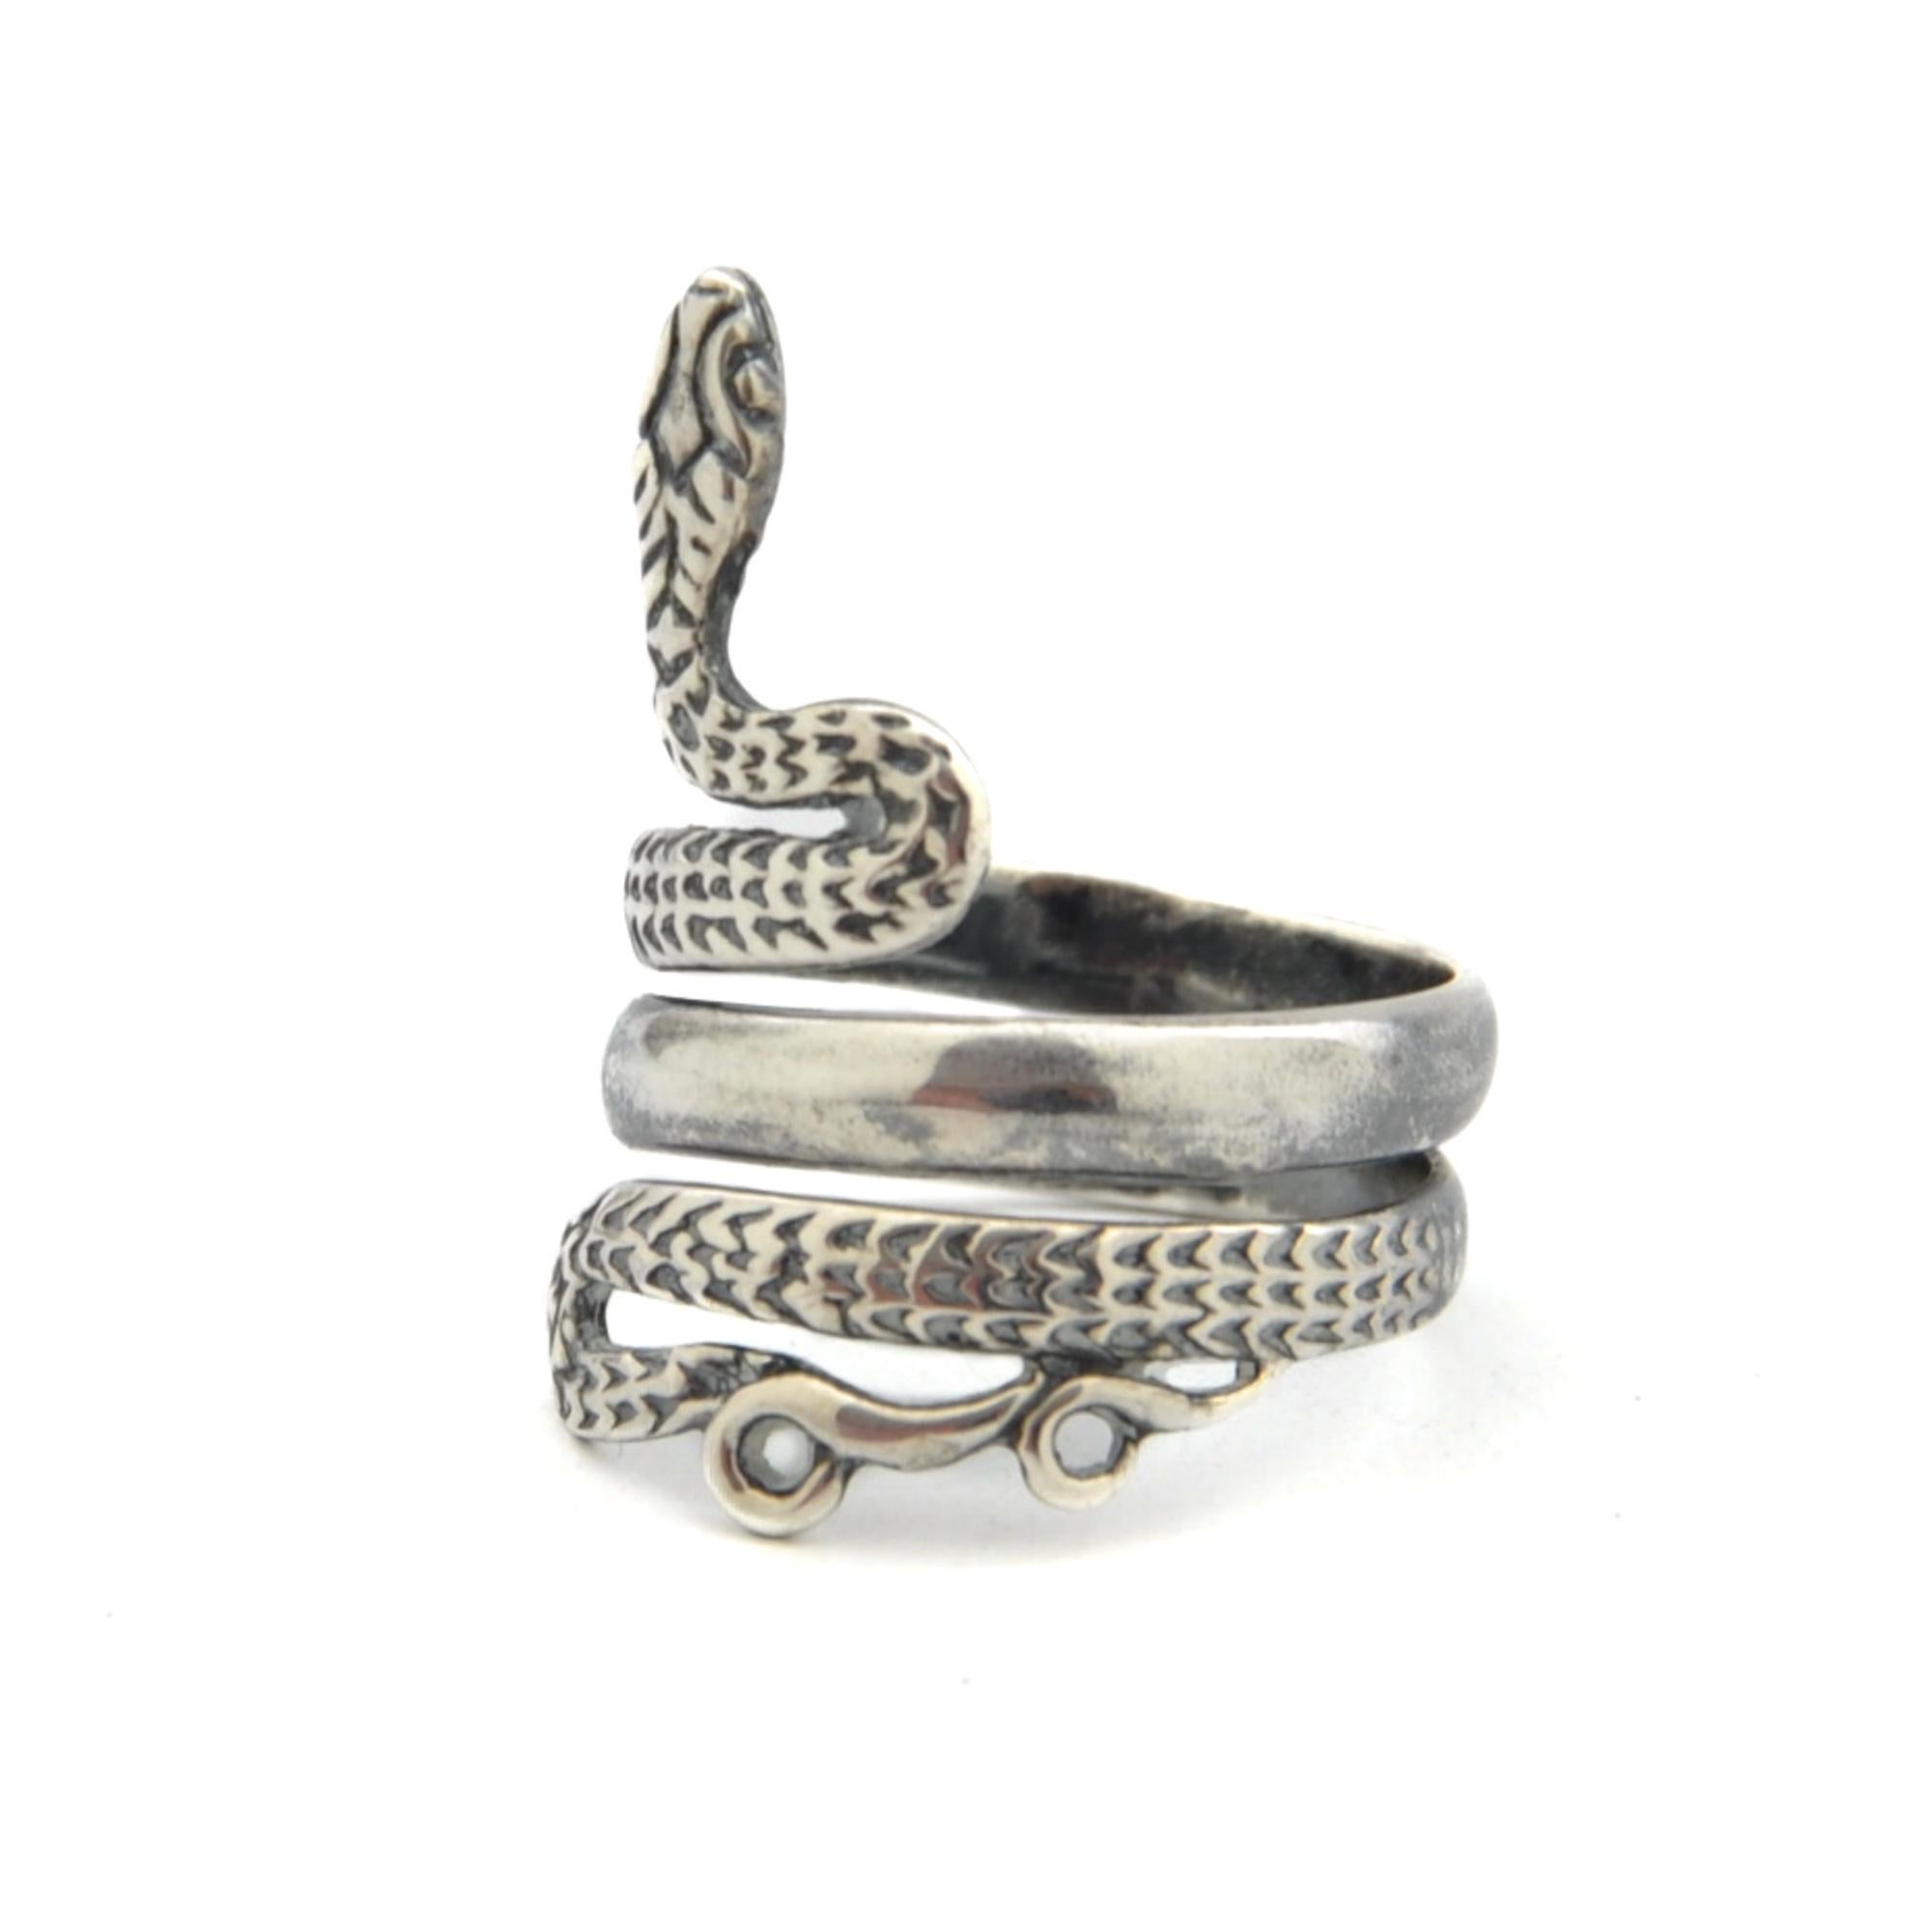 This beautiful snake ring and made of sterling silver. The ring is a real asset to any collection. The snake represents transformation and rebirth. You can wear the ring alone or you can wear it with your other favorites. The silver has a worked